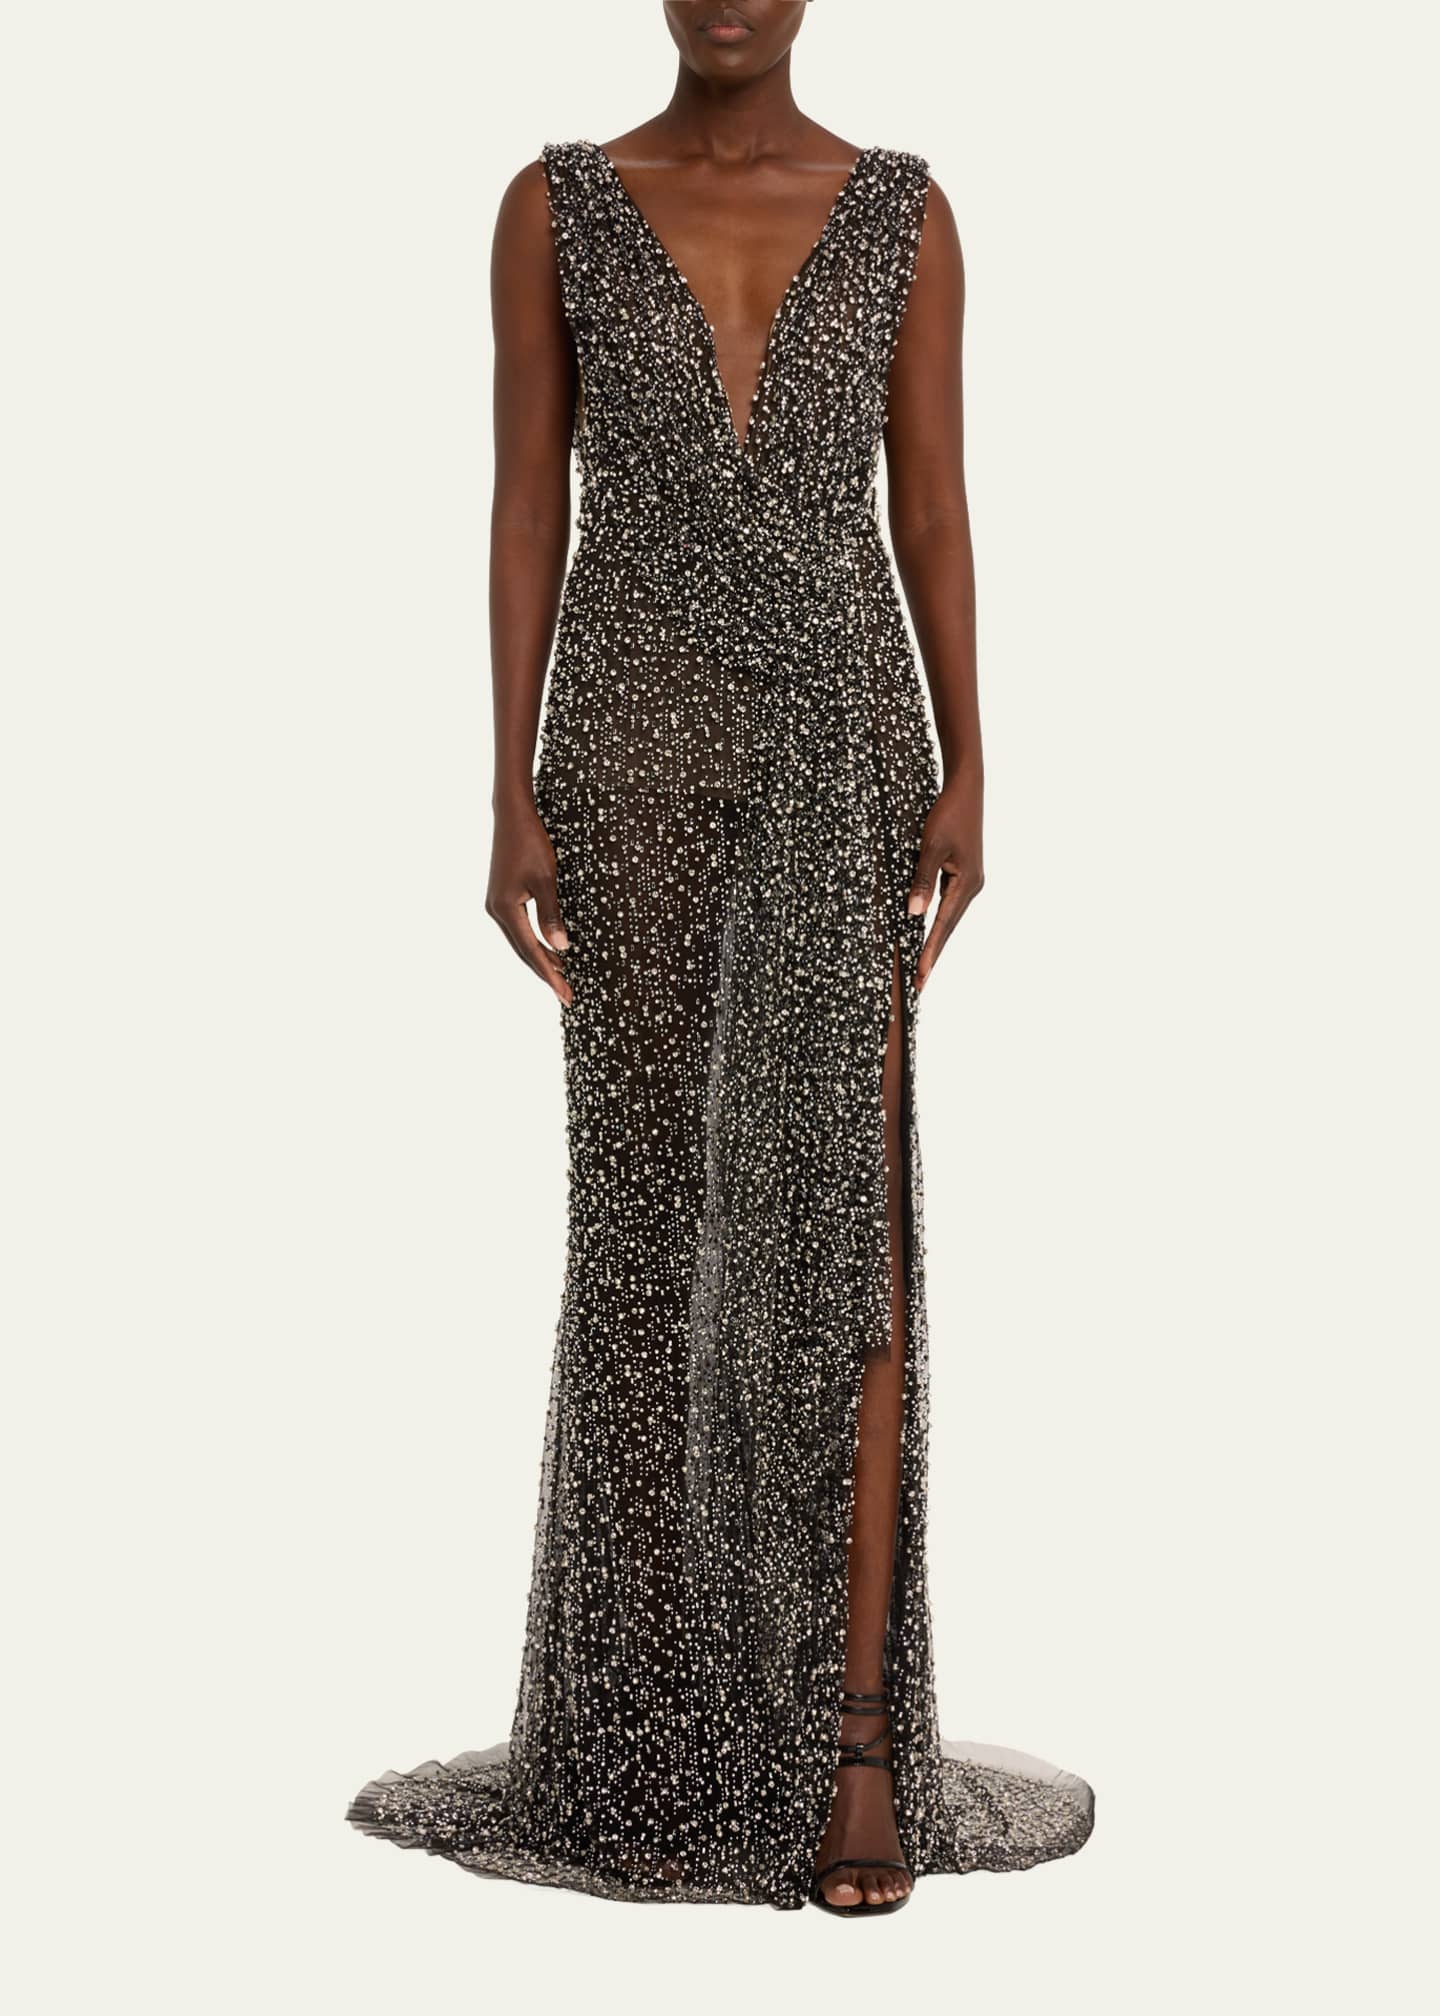 Marchesa Beaded Backless Gown with Slit - Bergdorf Goodman